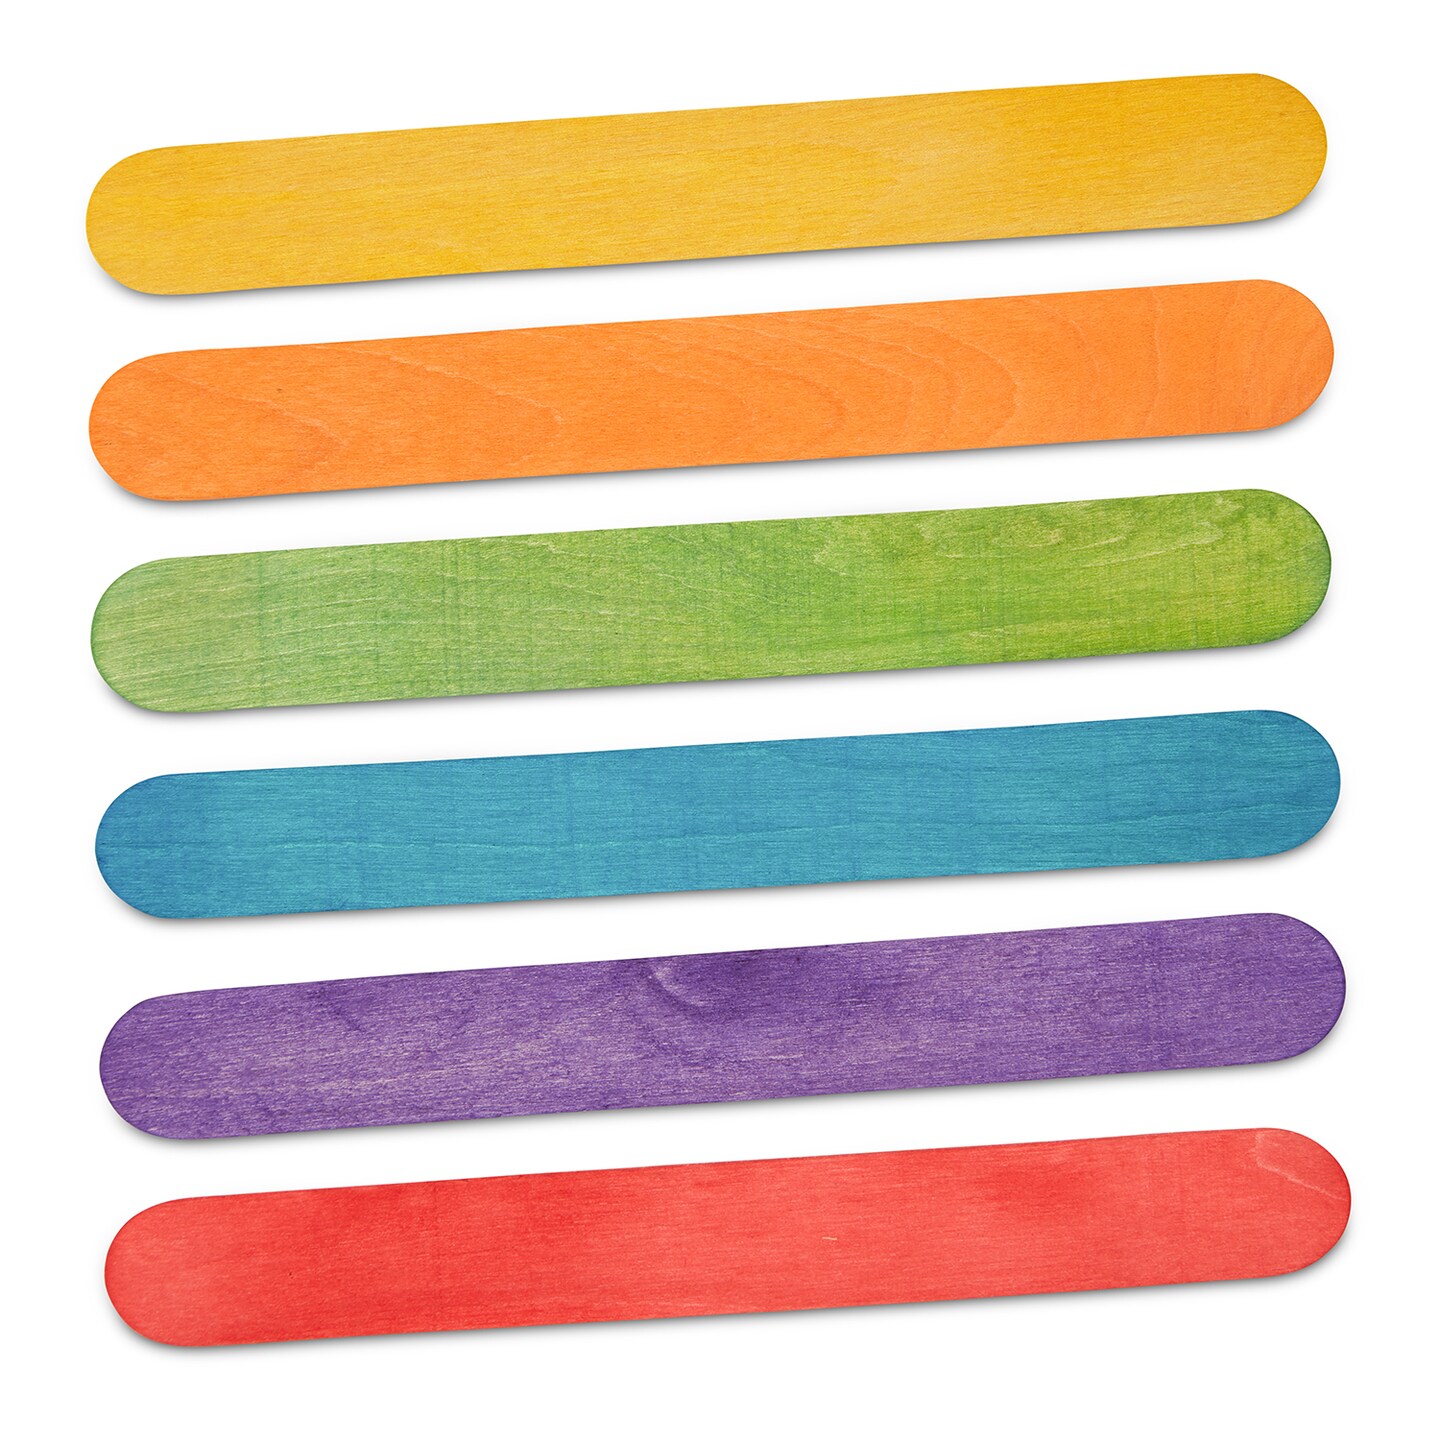 Woodpeckers Colored Popsicle Sticks for Crafts, Large Colored Craft Sticks, Pack of 100, Each Stick 6 Long x 3/4 Wide